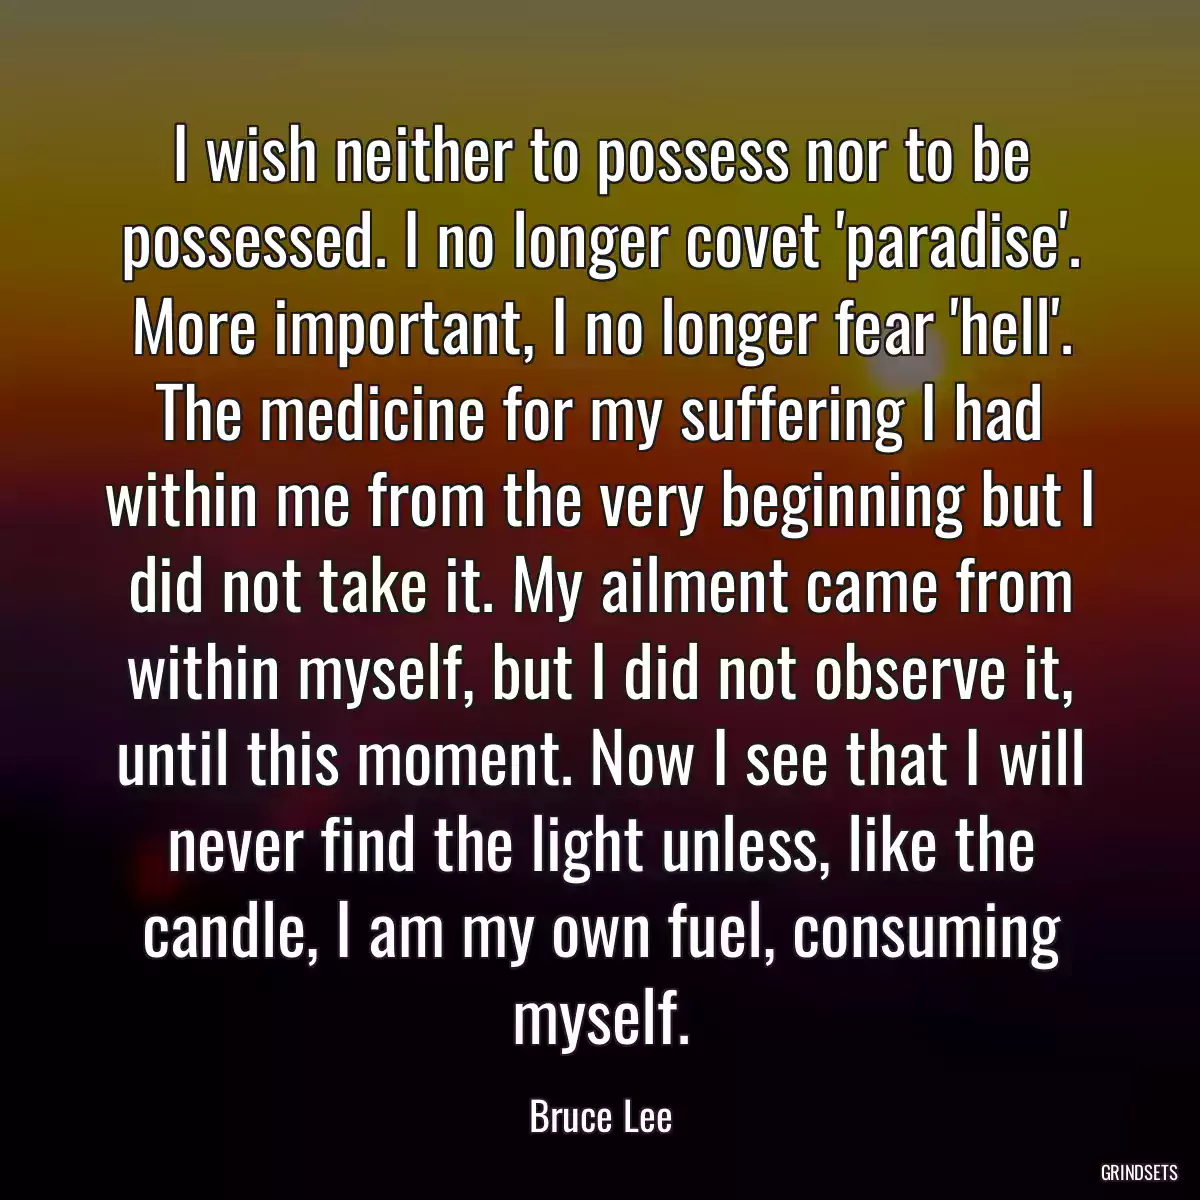 I wish neither to possess nor to be possessed. I no longer covet \'paradise\'. More important, I no longer fear \'hell\'. The medicine for my suffering I had within me from the very beginning but I did not take it. My ailment came from within myself, but I did not observe it, until this moment. Now I see that I will never find the light unless, like the candle, I am my own fuel, consuming myself.